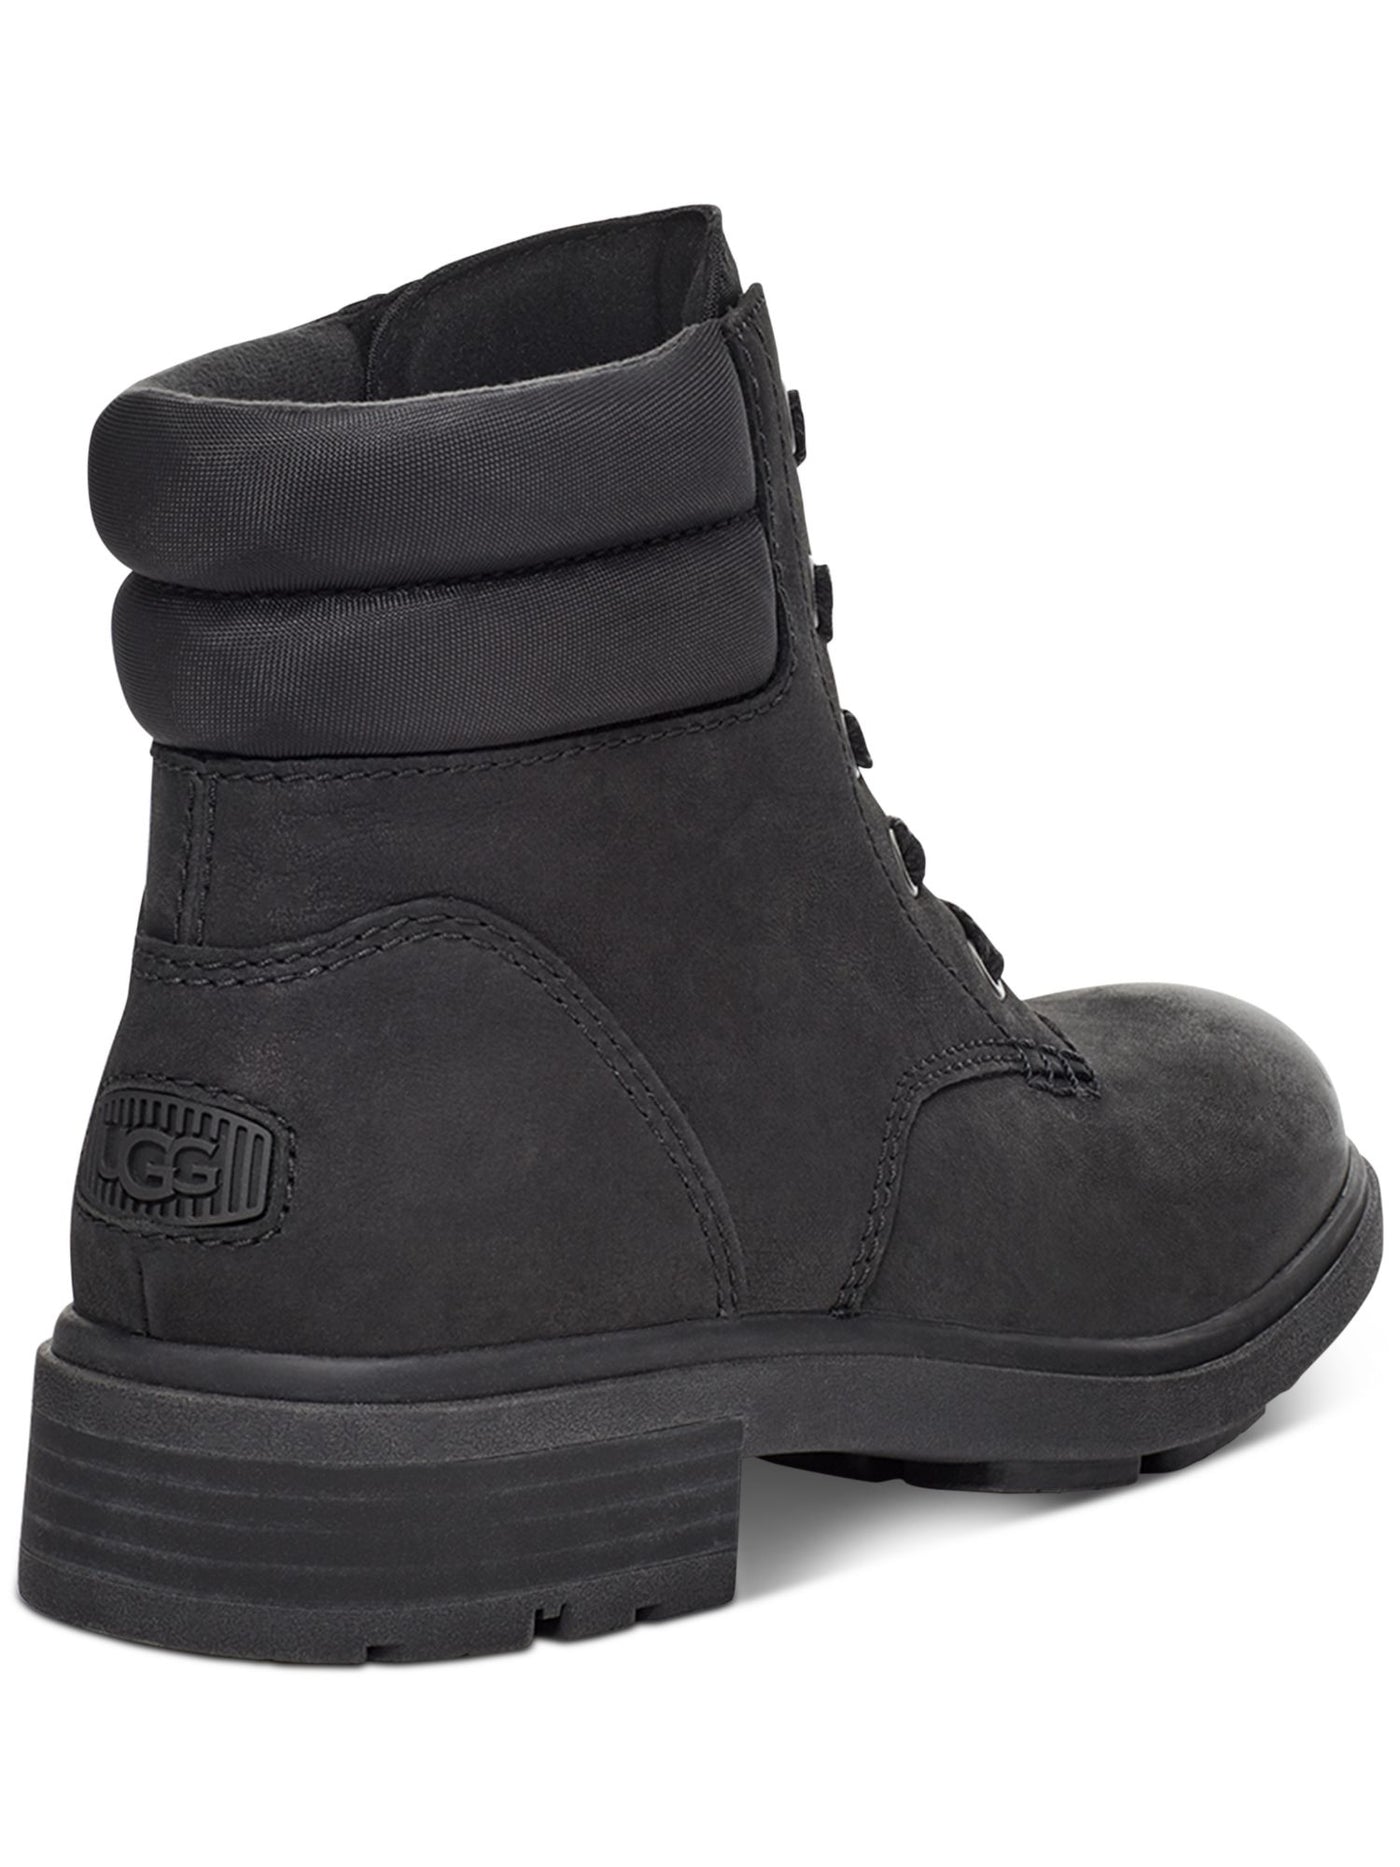 UGG Womens Black Waterproof Cushioned Harrison Round Toe Block Heel Lace-Up Leather Booties 11